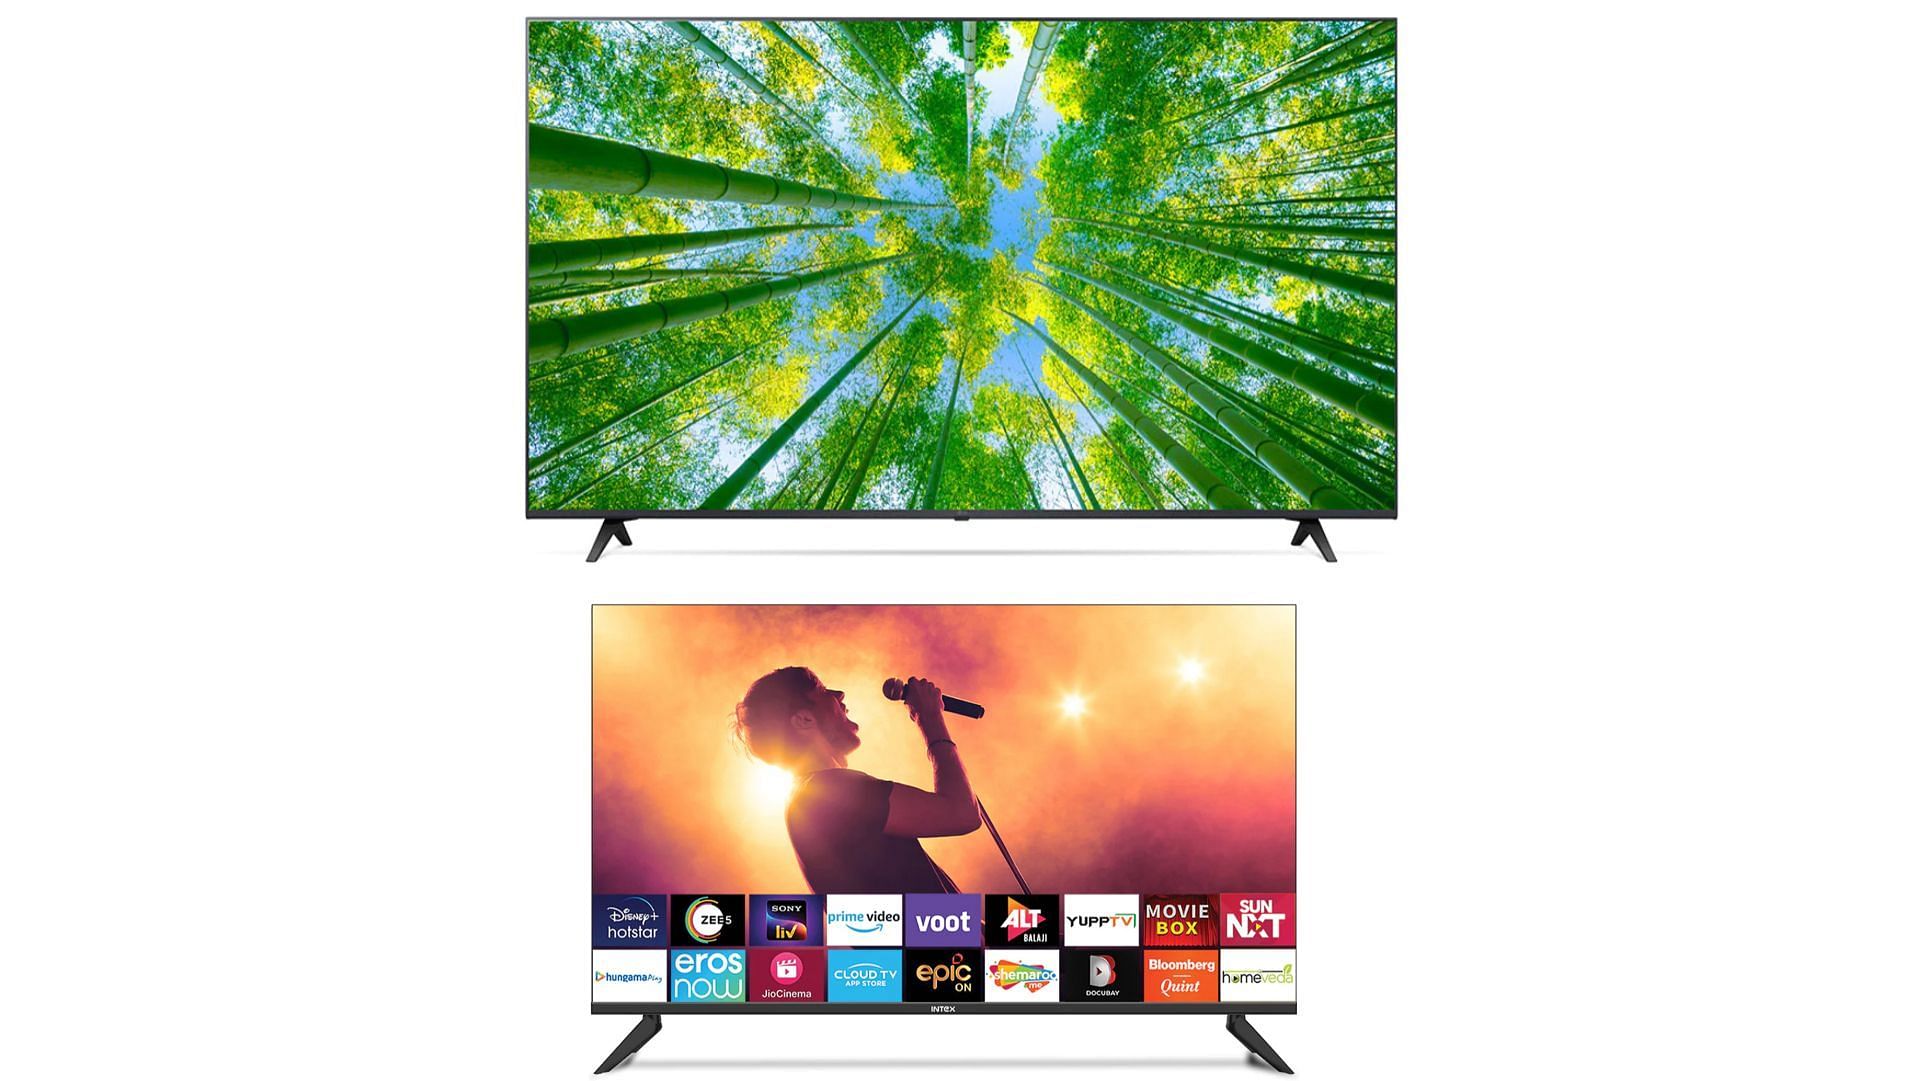 five common problems in Smart TVs (image by Intex and LG)